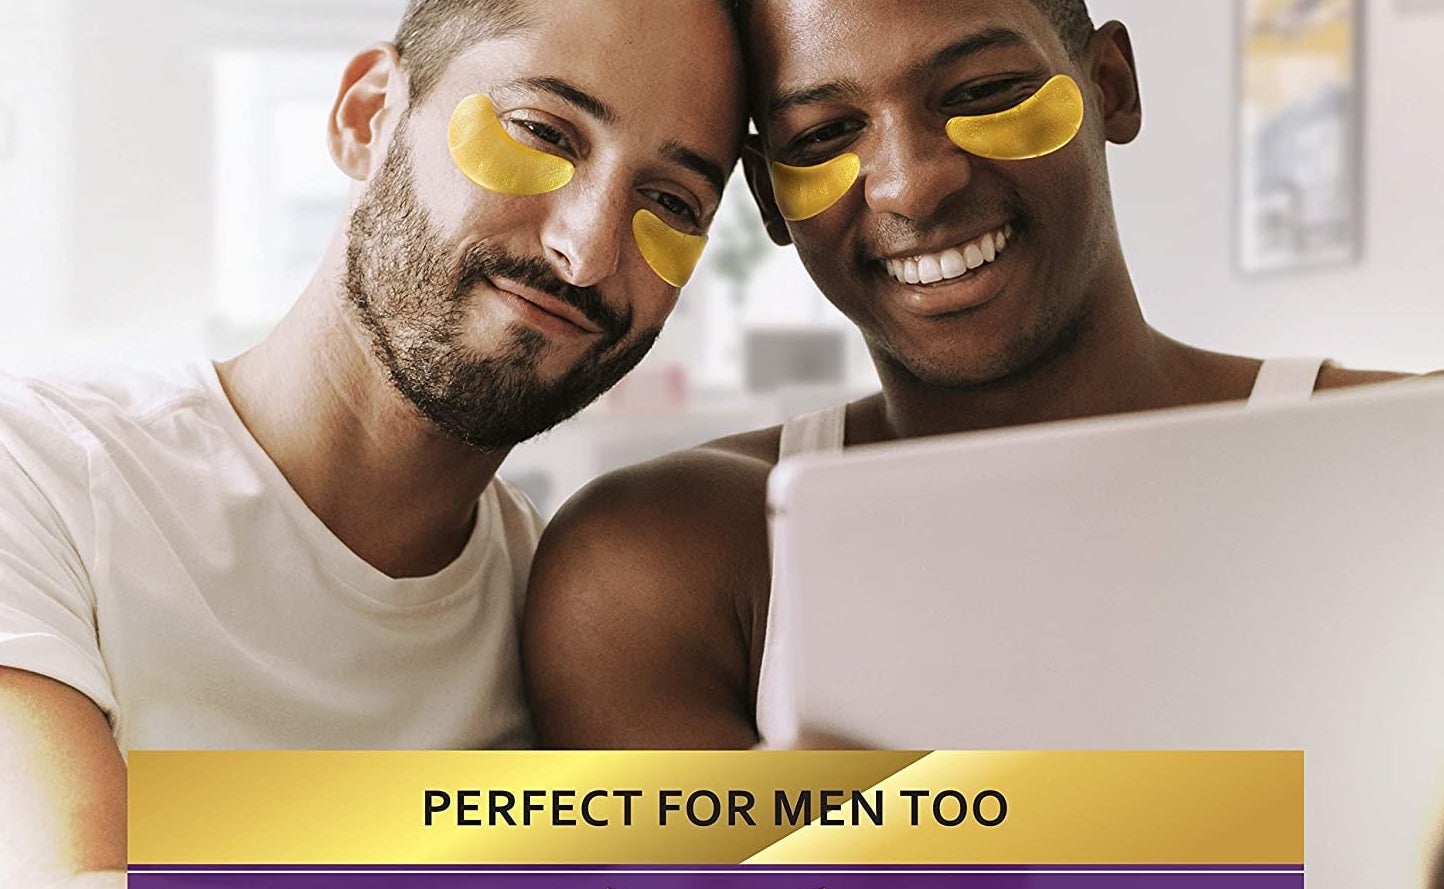 A couple wearing the gold under eye masks as they look at a tablet